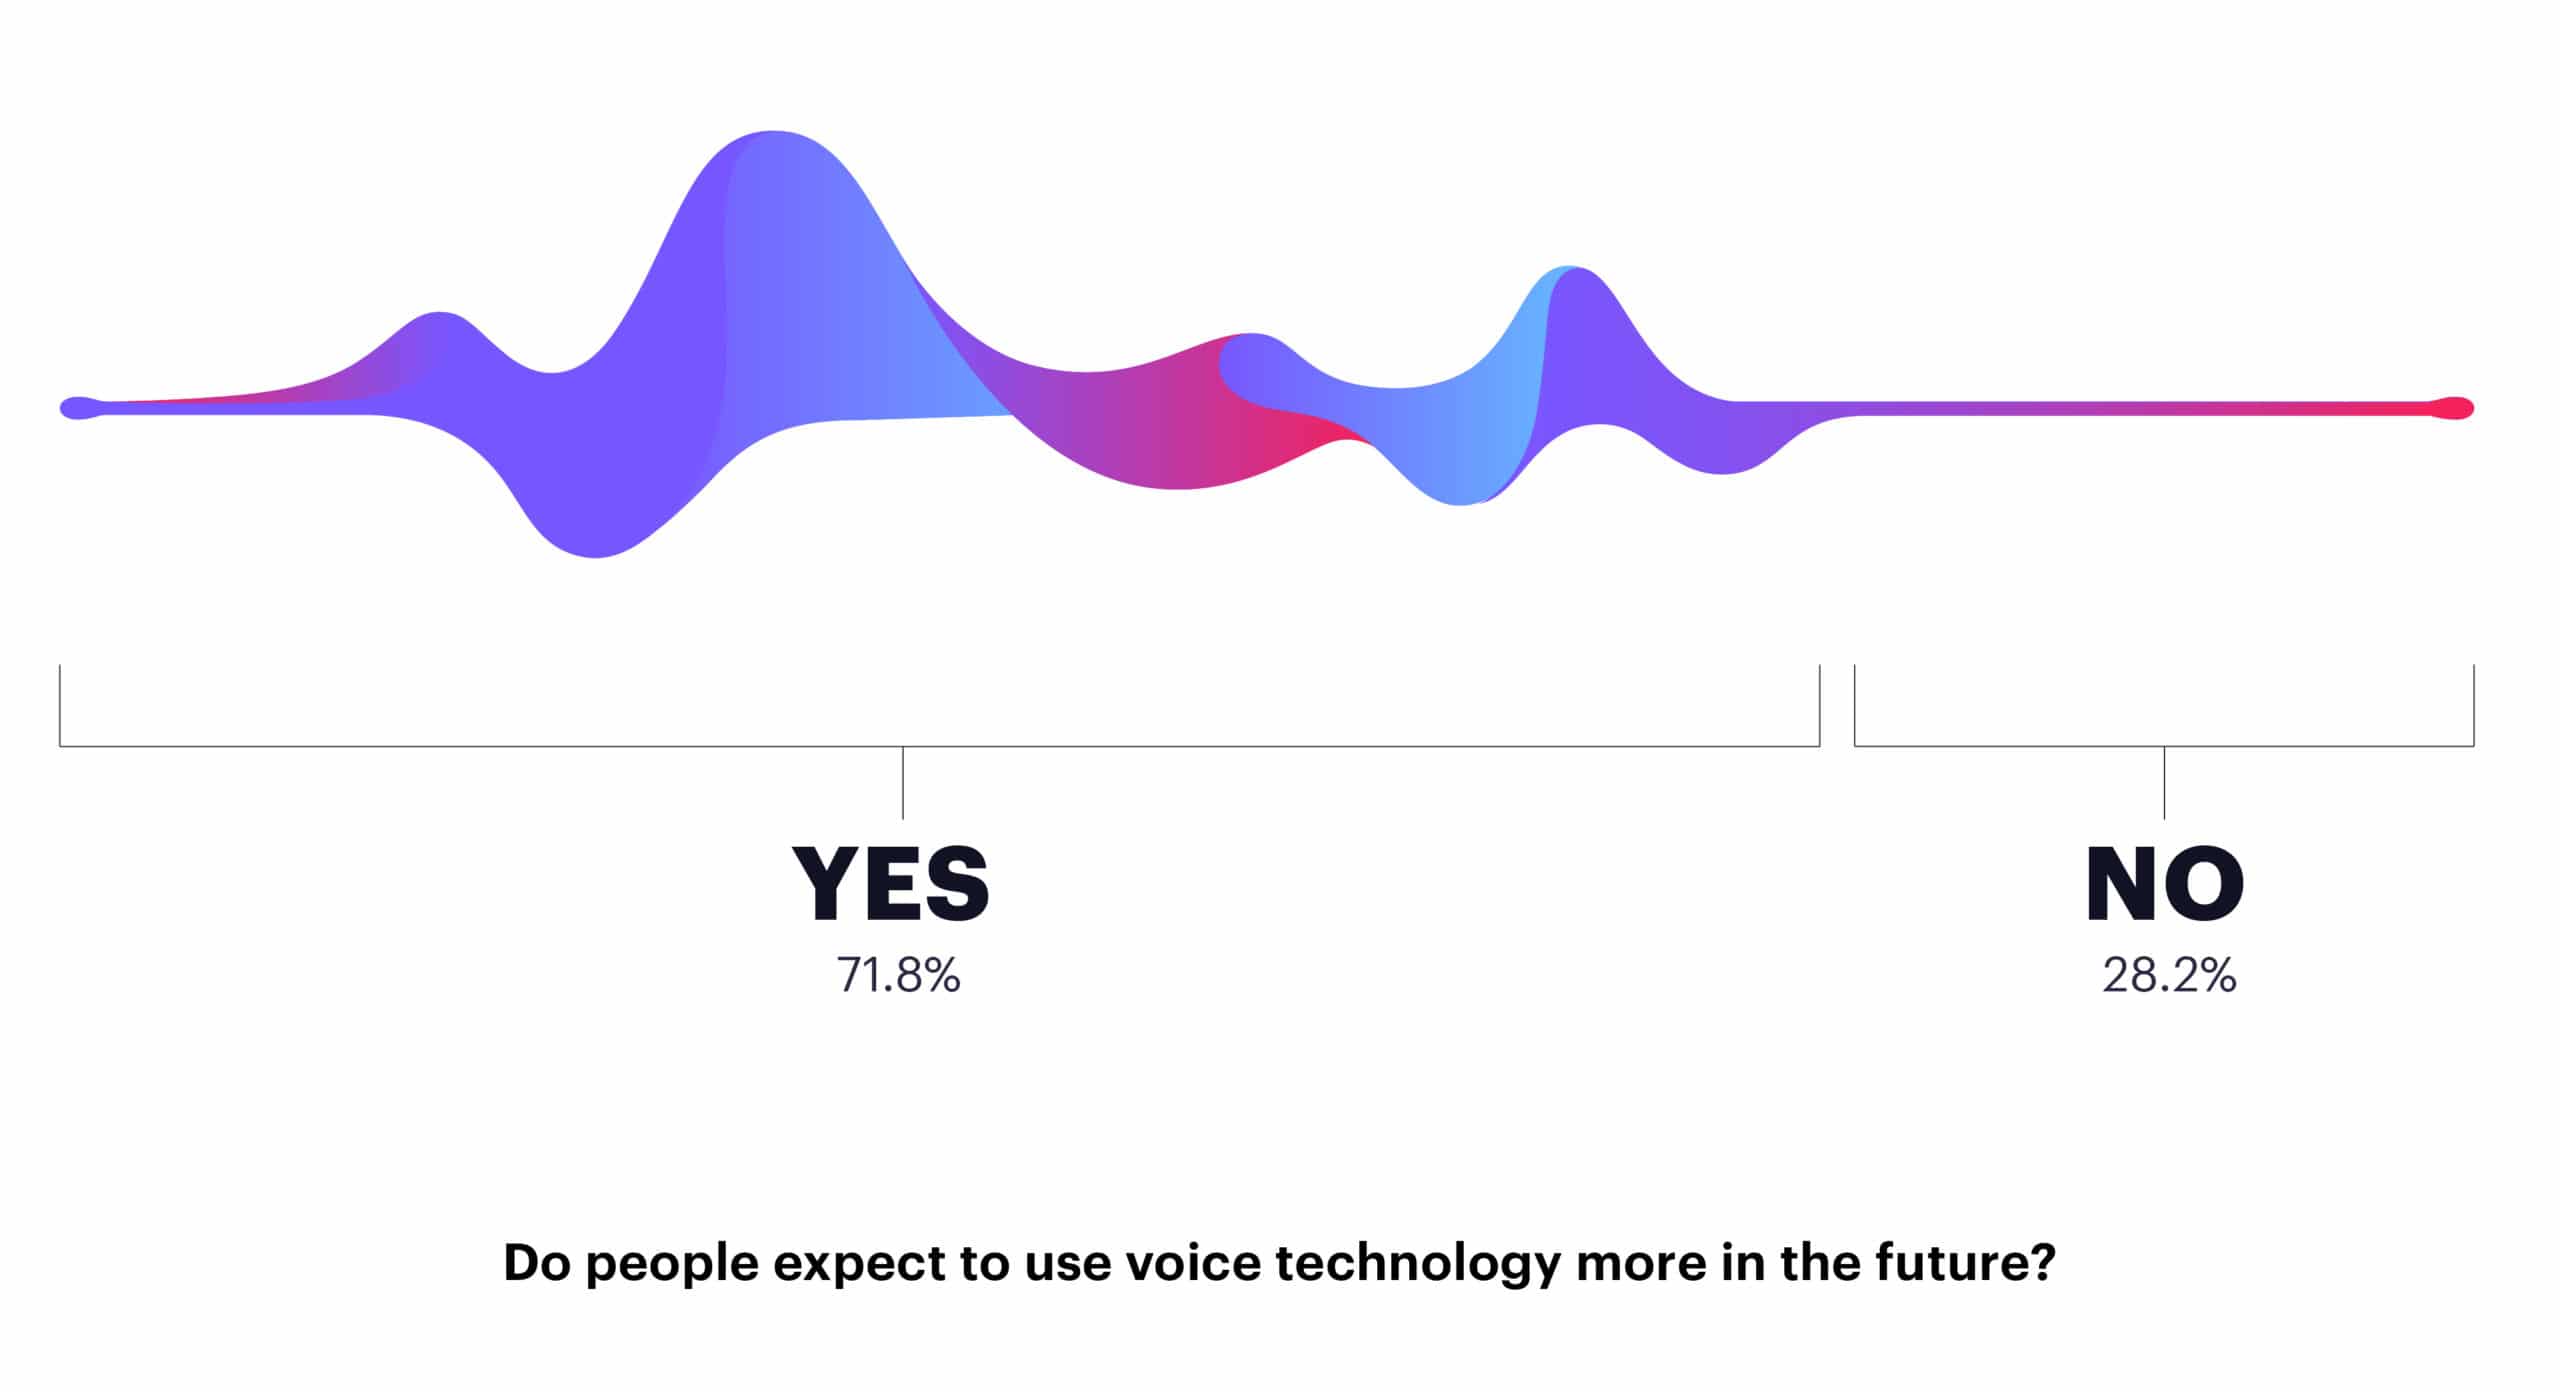 71.8% of our respondents expect to use voice technology more in the future.